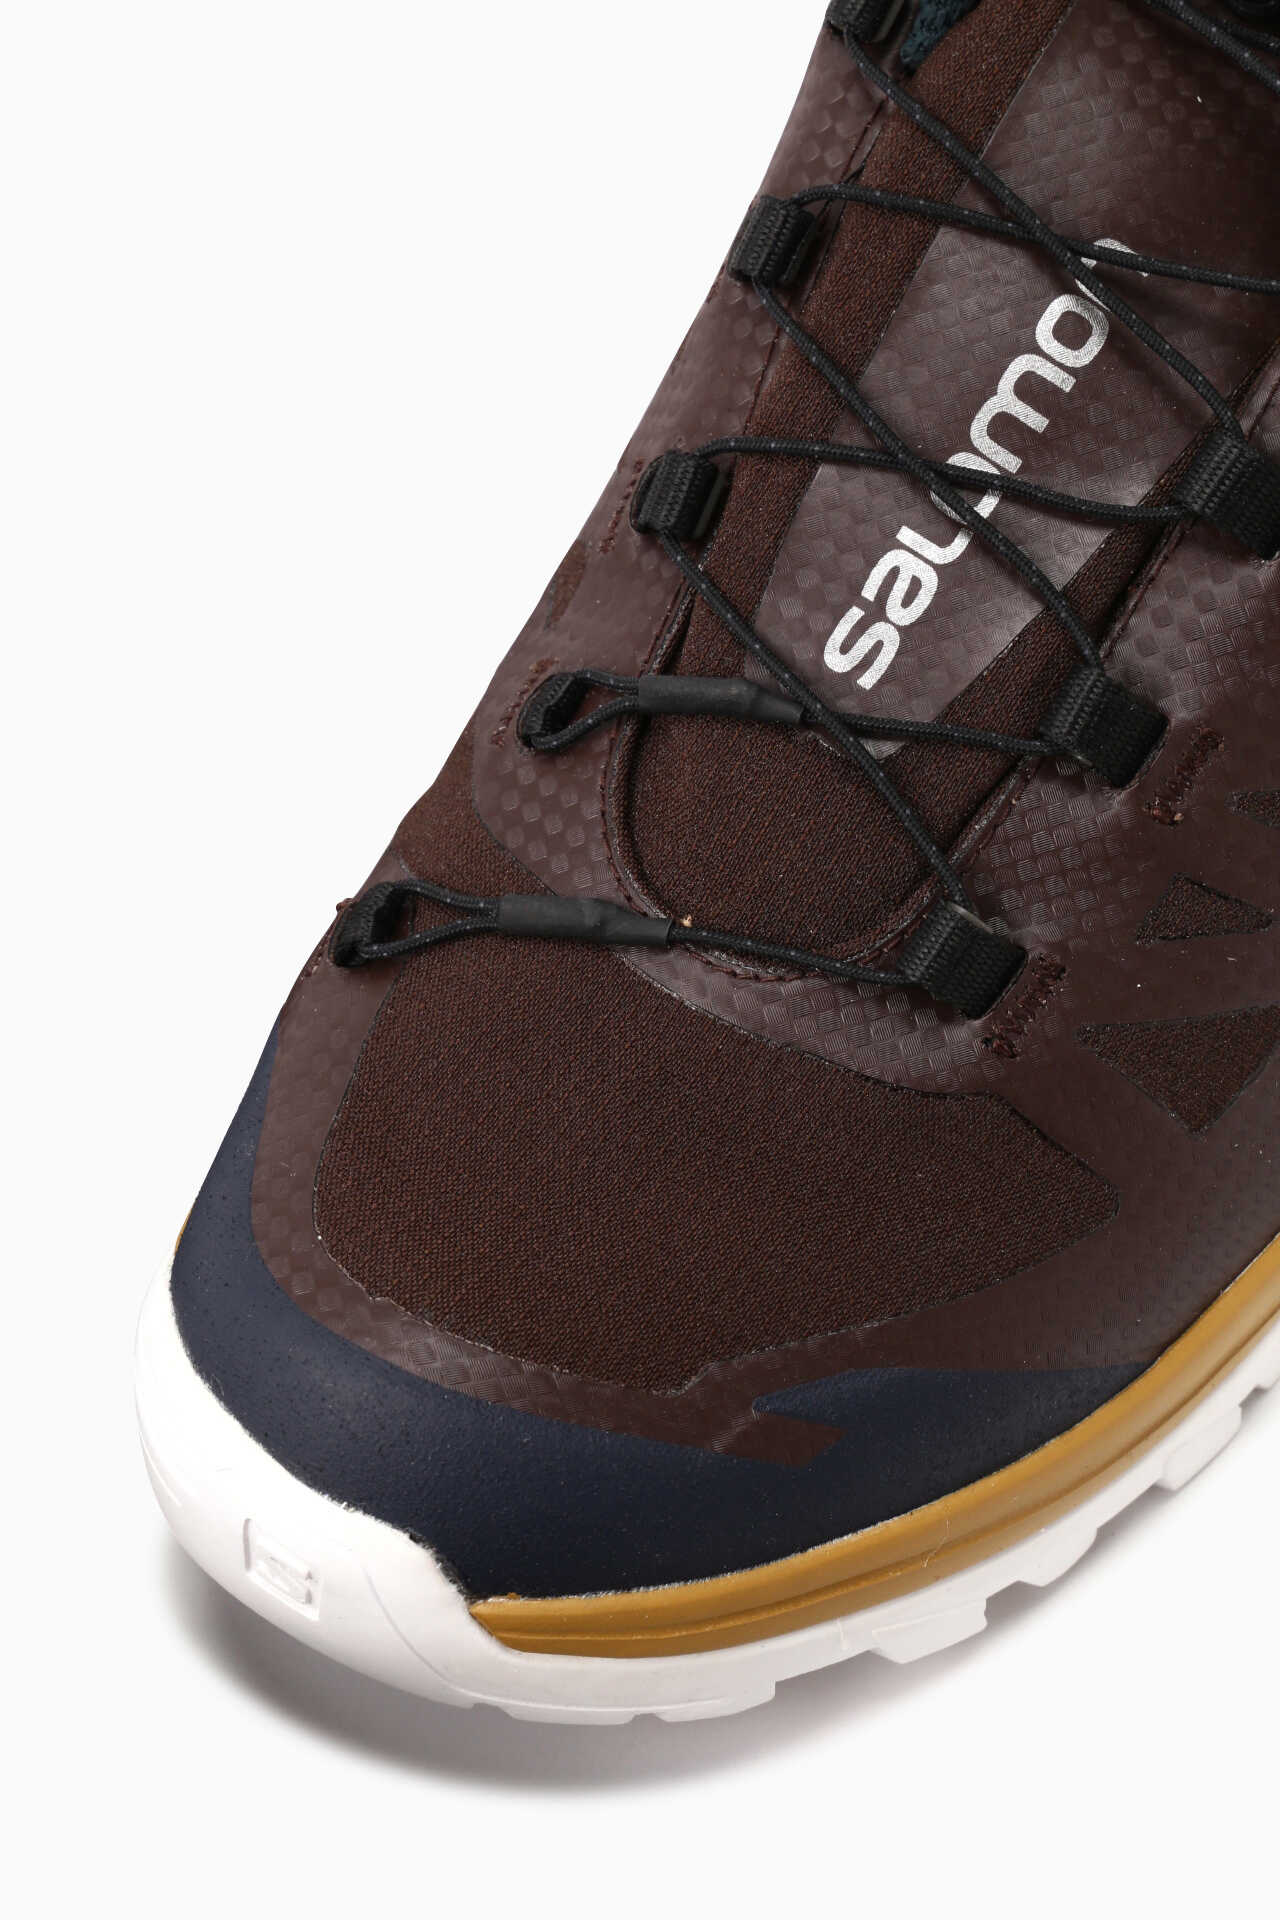 SALOMON OUTpath CSWP for and wander